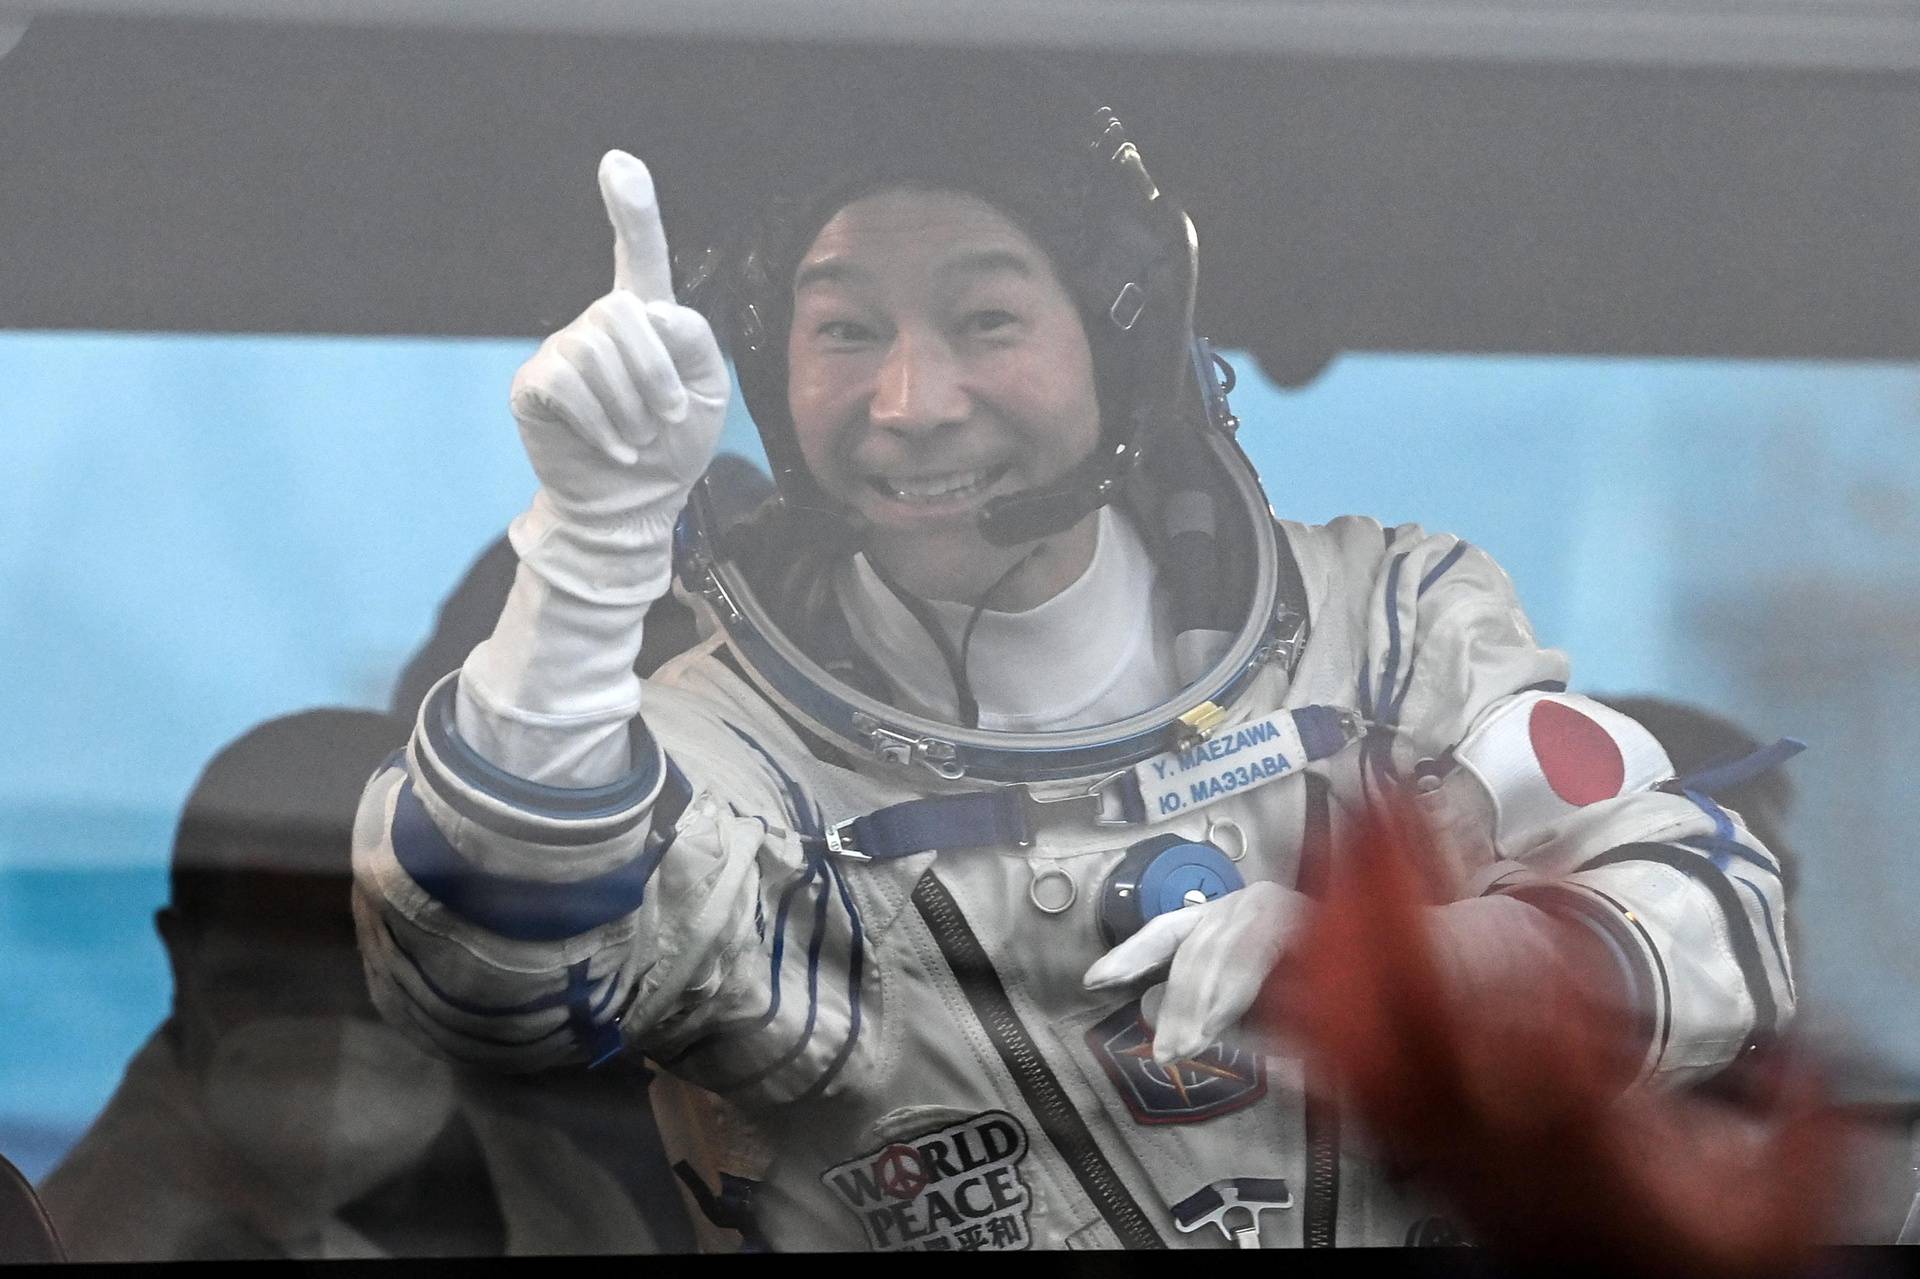 Japanese entrepreneur Yusaku Maezawa waves from a bus as he departs for his launch to the International Space Station (ISS) at the Baikonur Cosmodrome